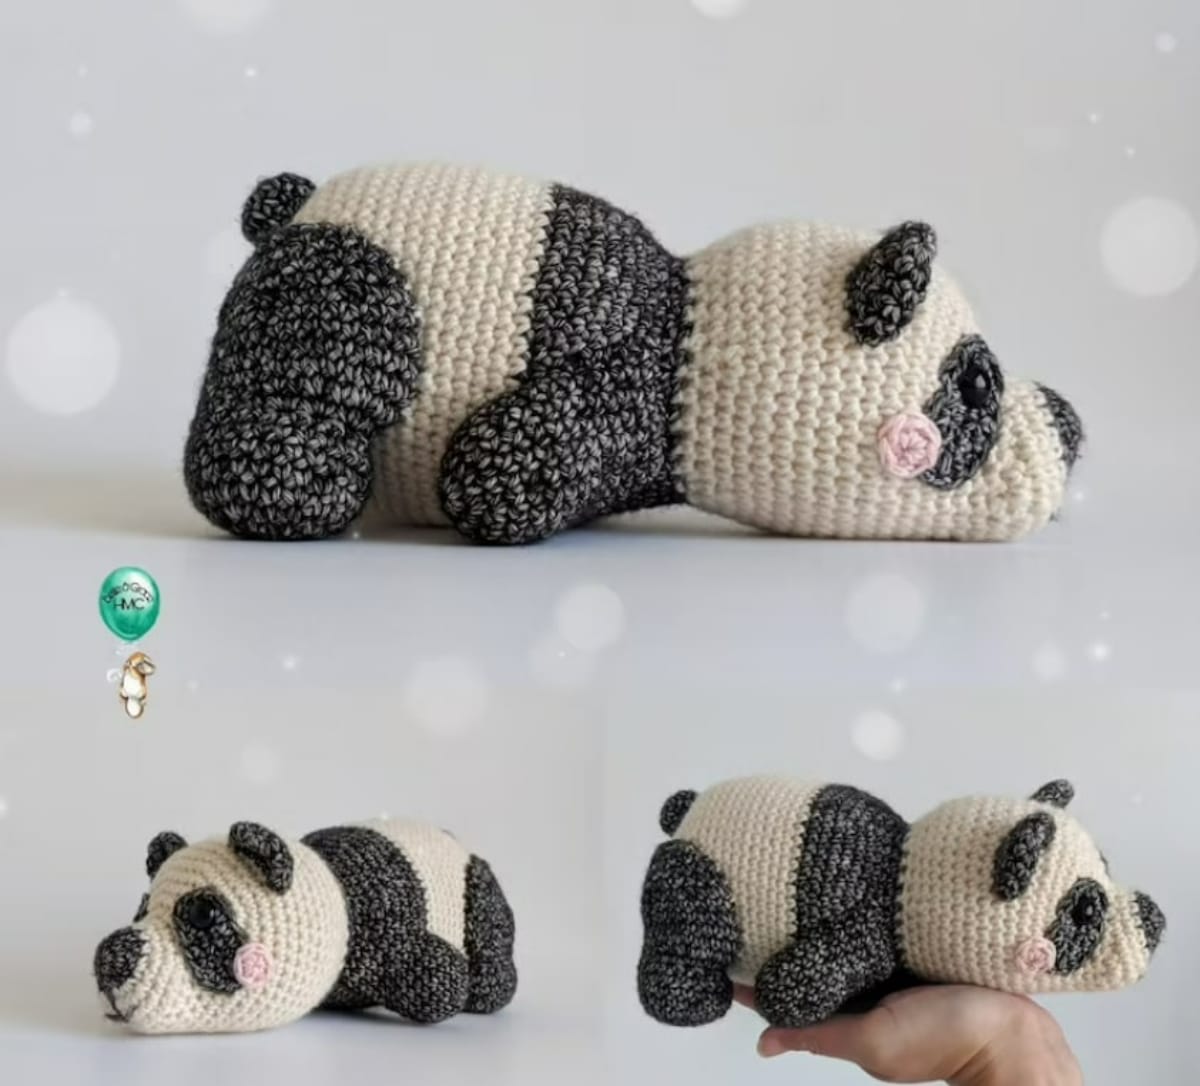 Cream and black crochet panda laying on the round with pink circles next to its eyes. Panda is lying side profile in a series of three images.